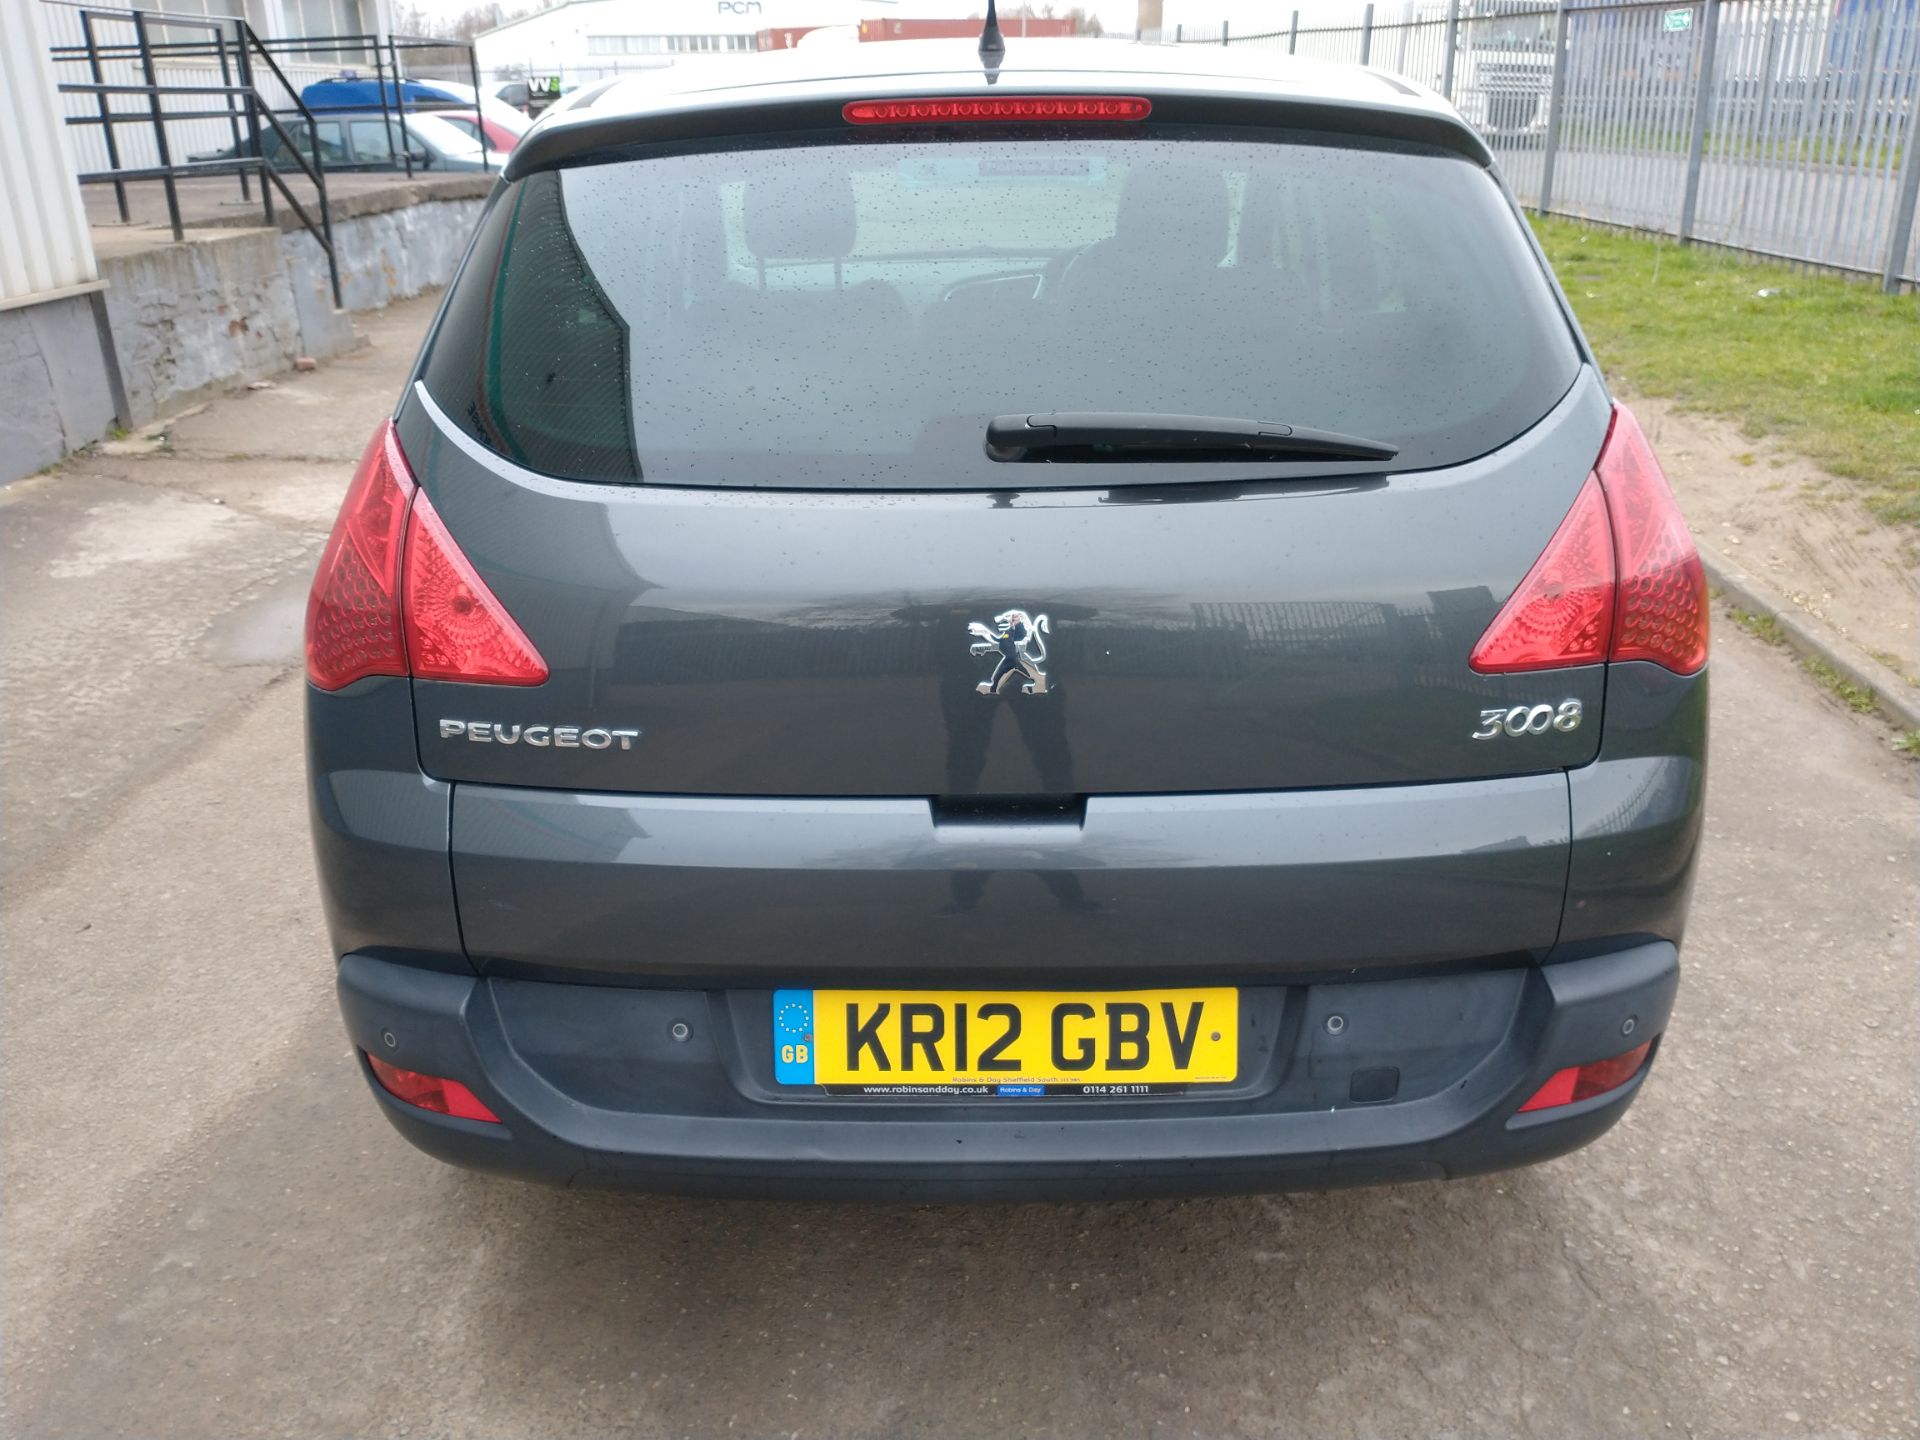 2012 Peugeot 3008 Active HDI 1.6 5DR SUV - CL505 - NO VAT ON THE HAMM - Image 17 of 19